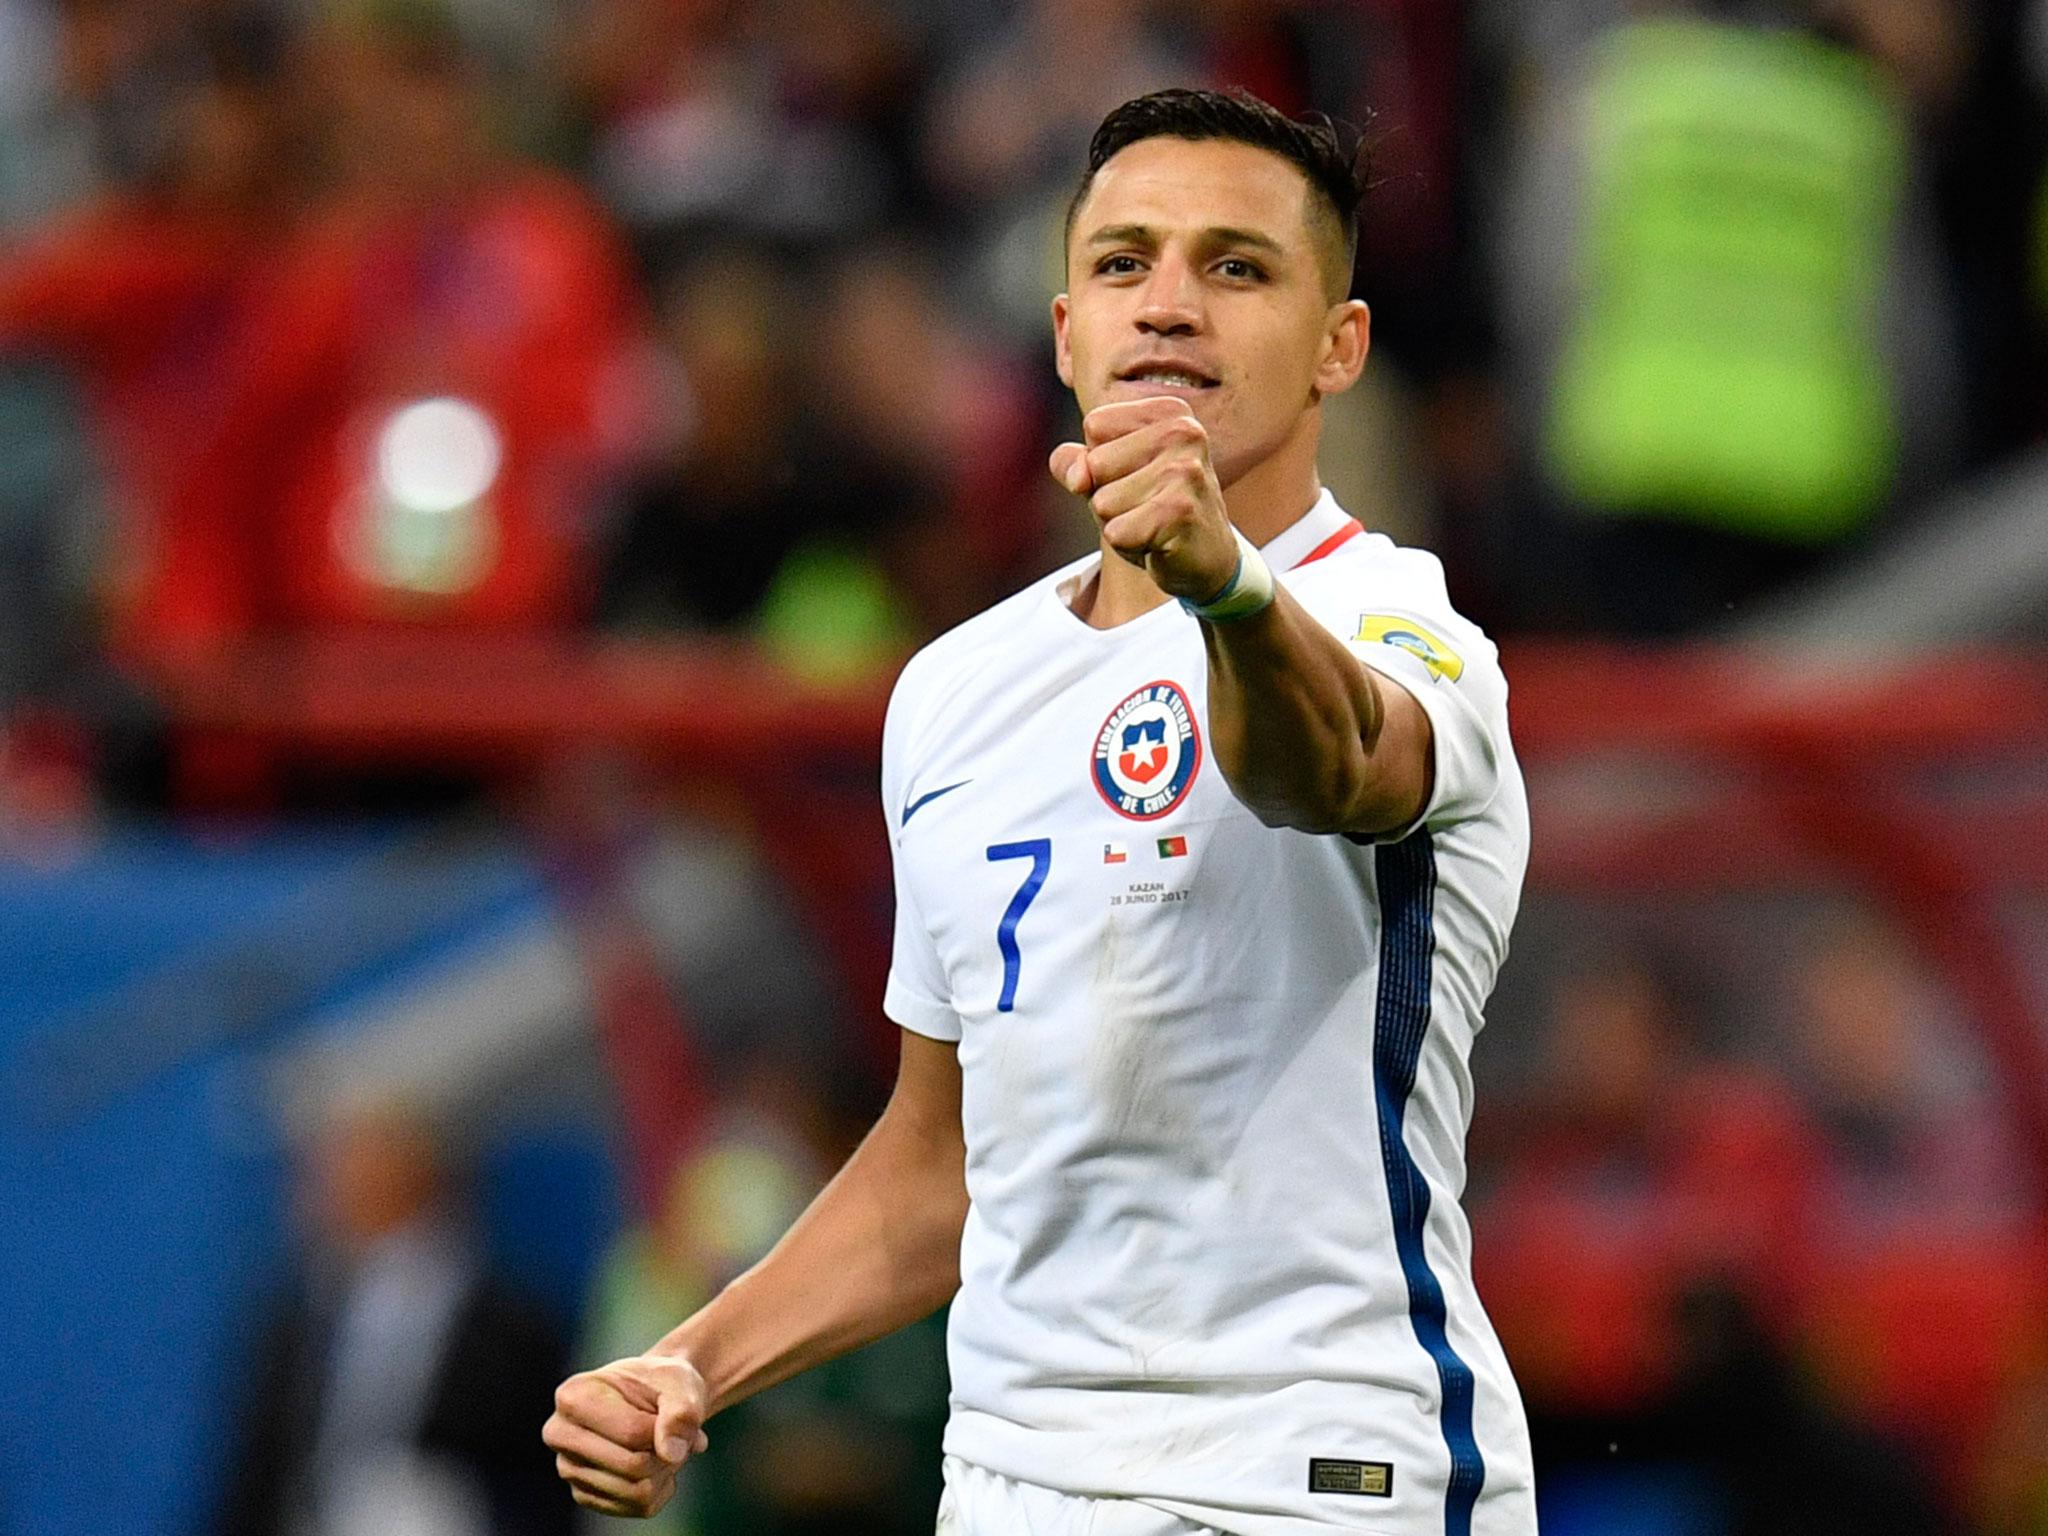 Sanchez has been linked with a move away from Arsenal